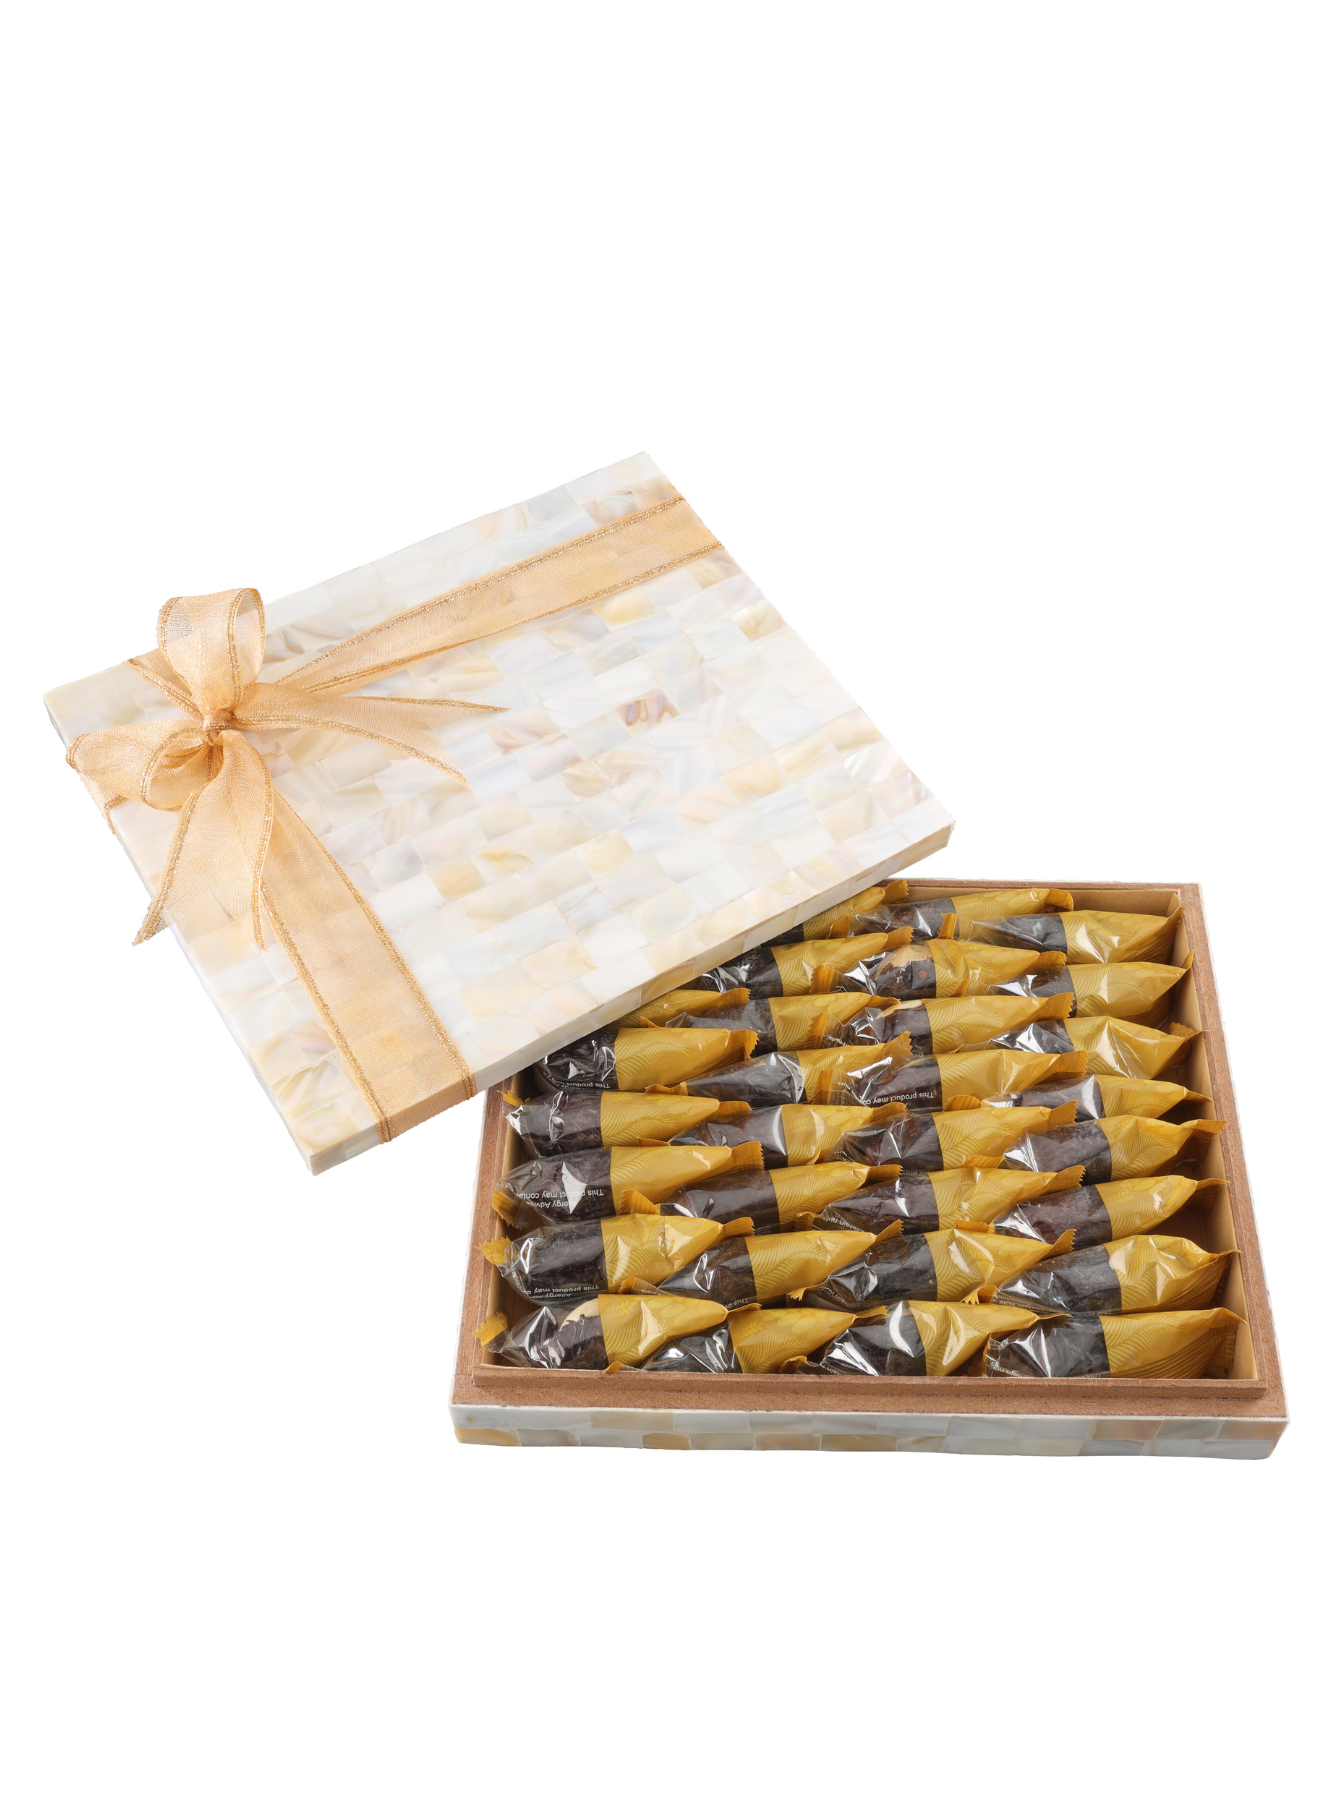 Safawi Dates with Mother of Pearl Box (32 Pcs - Multi-piece)